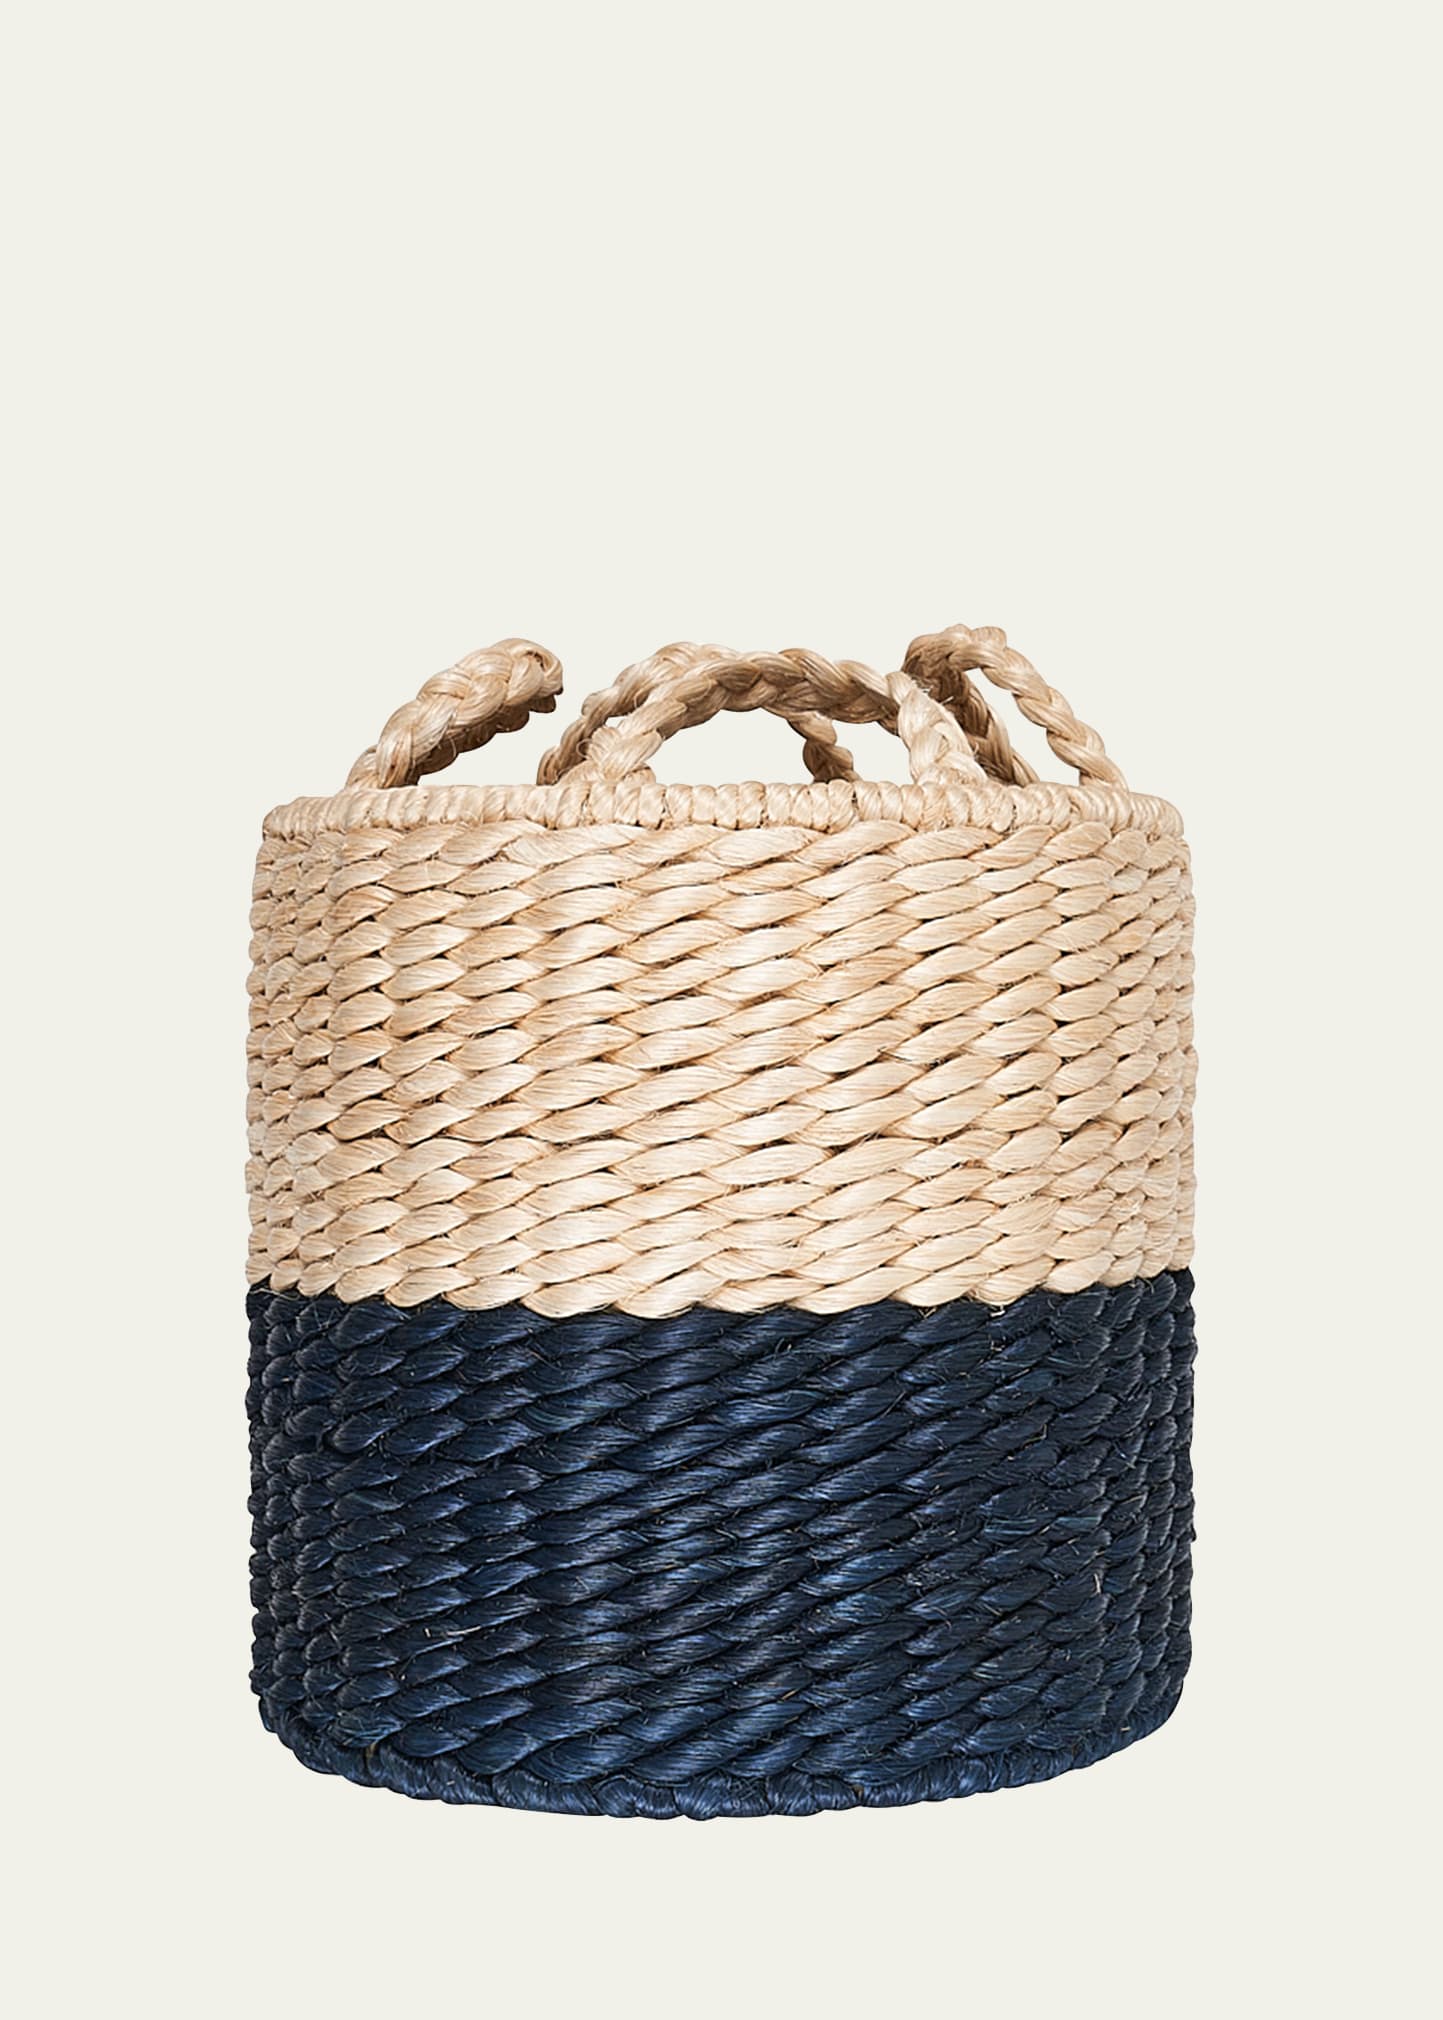 Schumacher Lubid Blue-dipped Abaca Basket, 24" In Blue Dipped